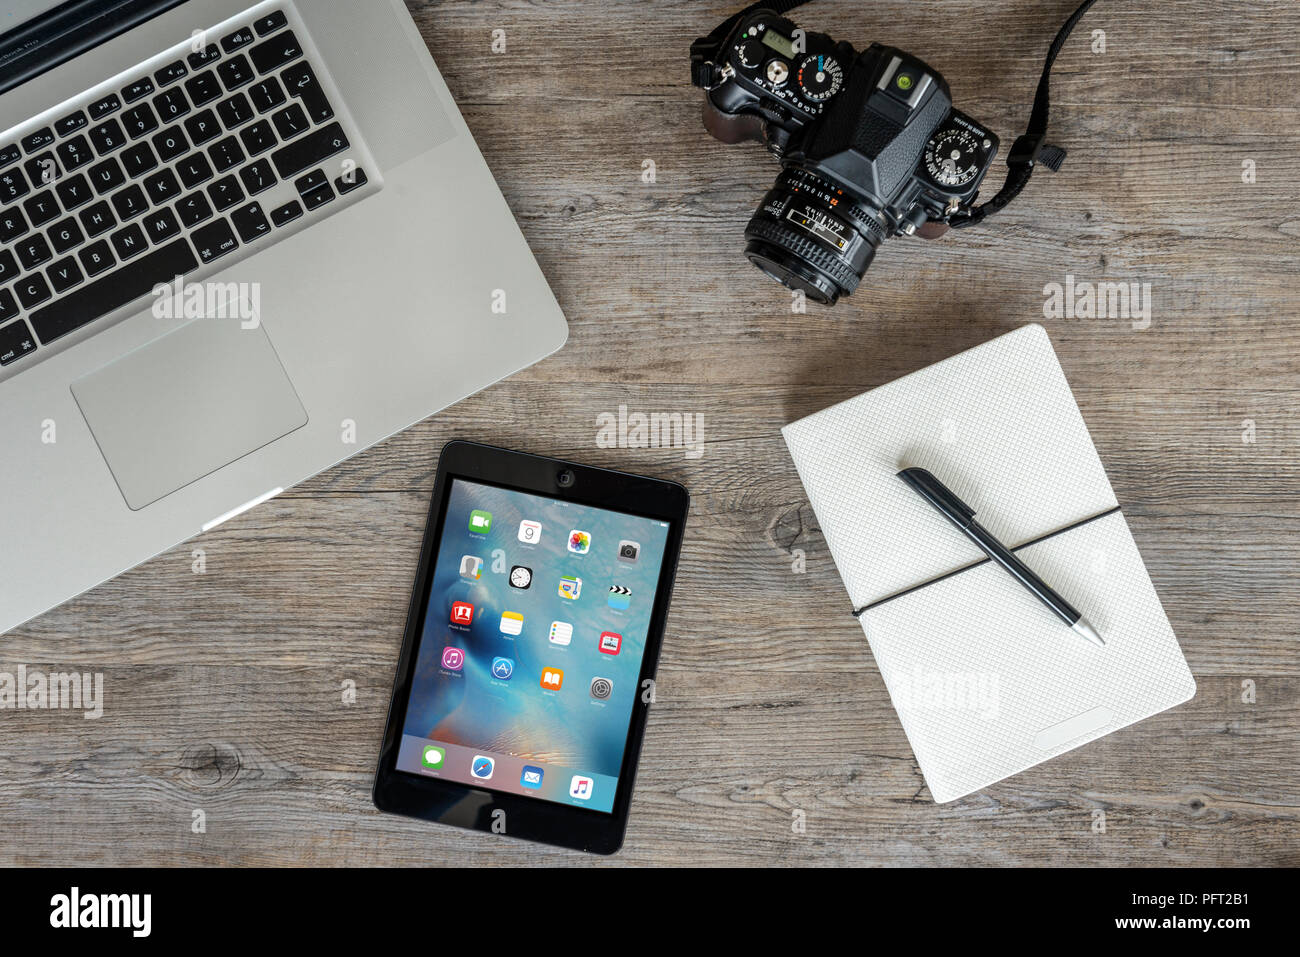 flat lay, wooden table top with laptop computer, retro camera and ipad. Stock Photo